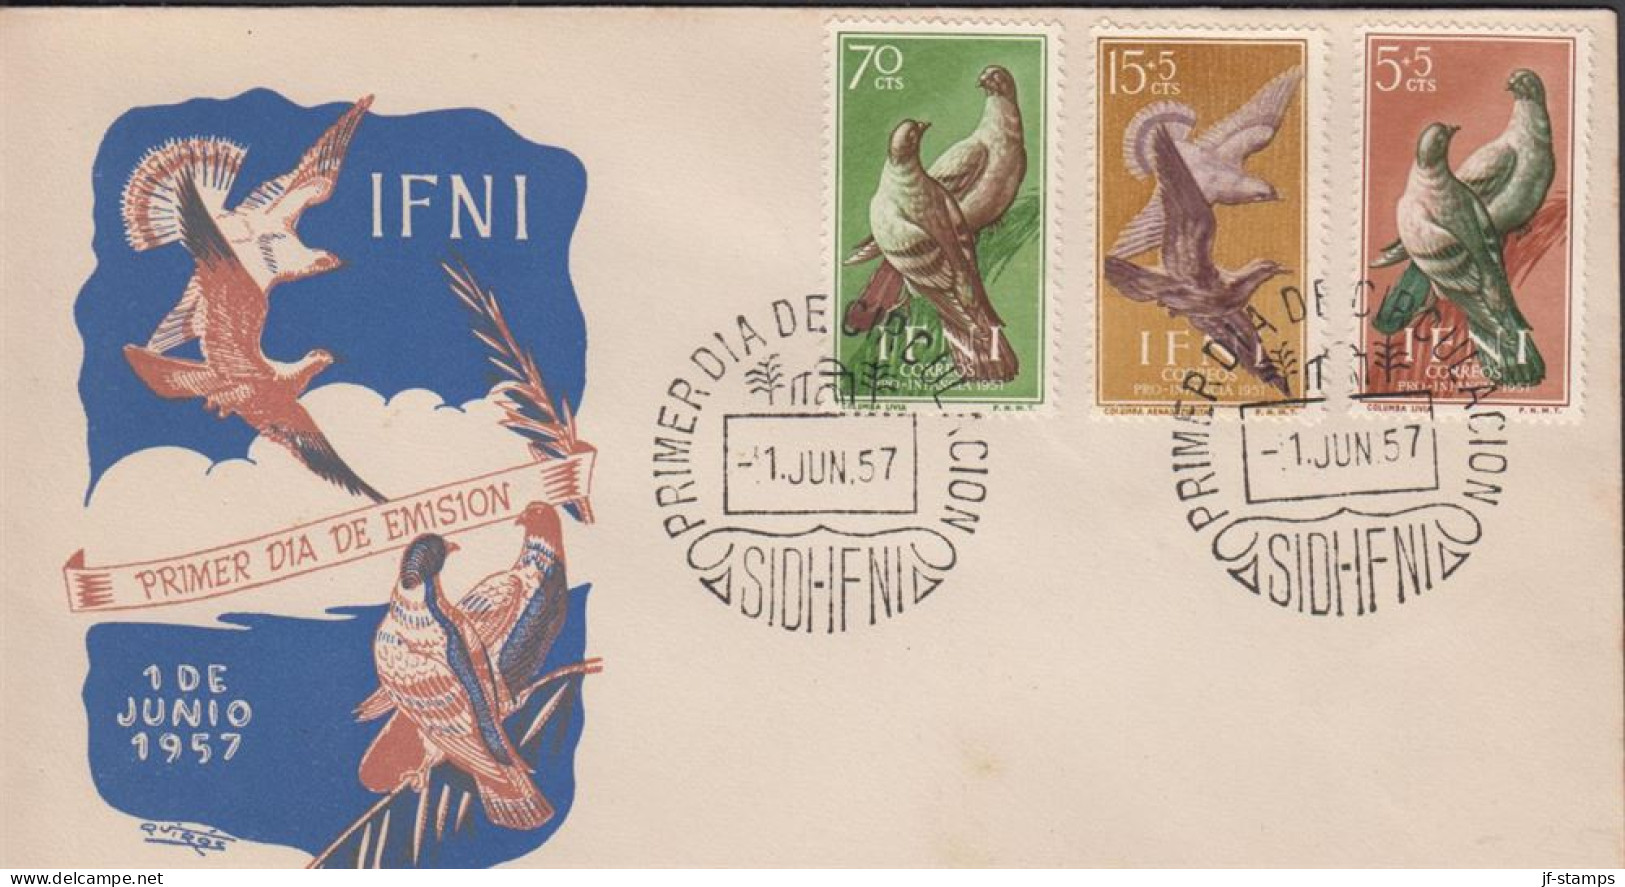 1957. IFNI. Beautiful FDC With Complete Set Birds Cancelled First Day Of Issue 1. JUN. 57... (MICHEL 164-166) - JF440047 - Ifni